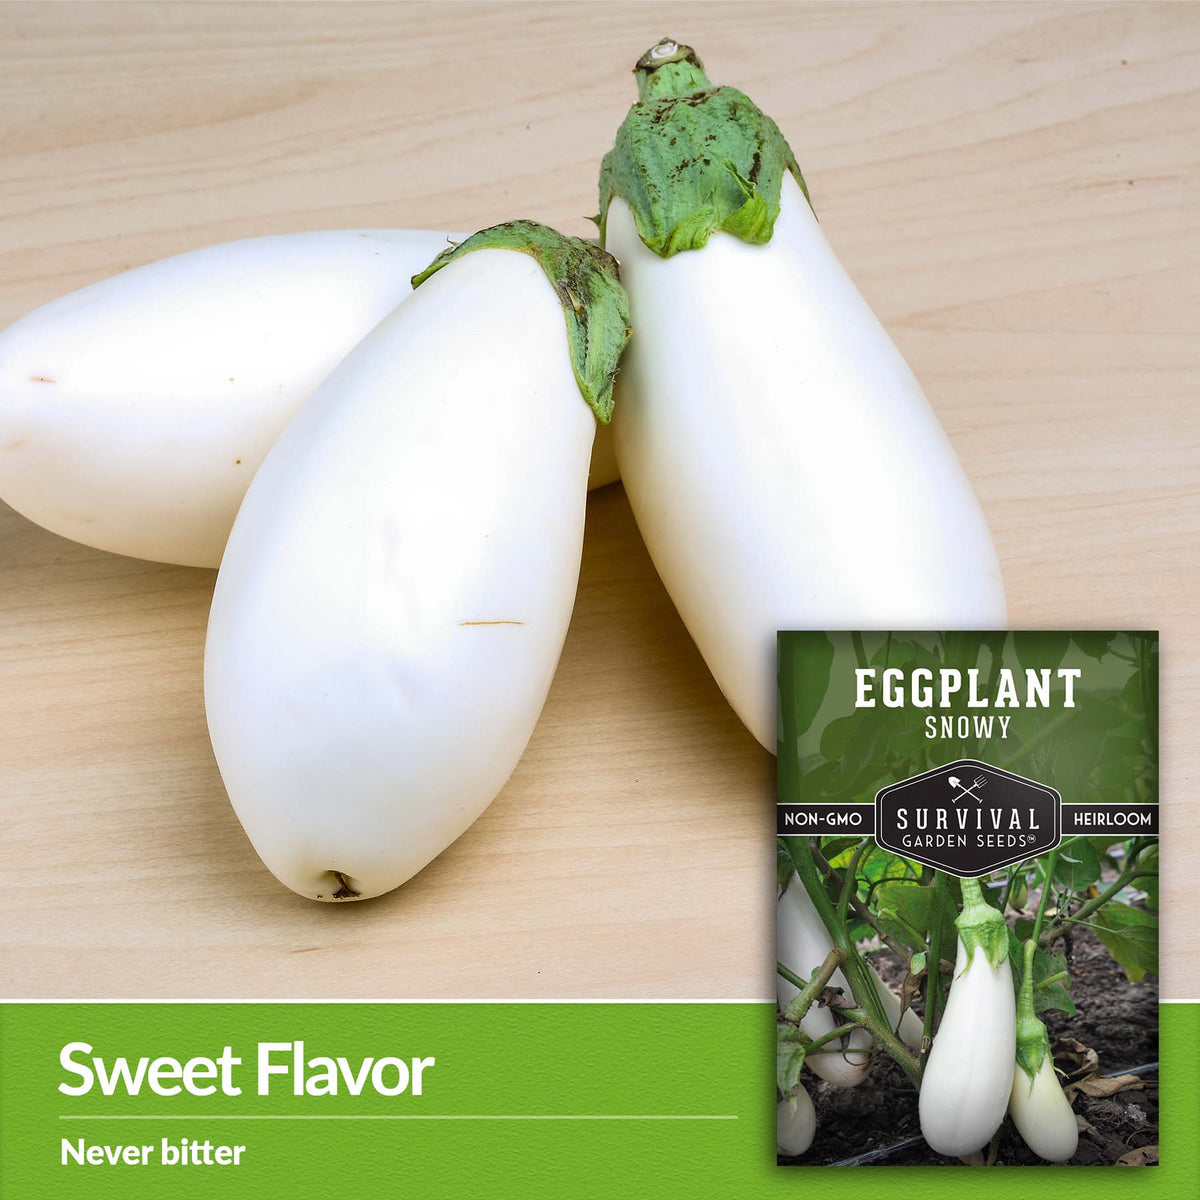 Snowy eggplants are sweet with no bitter flavor